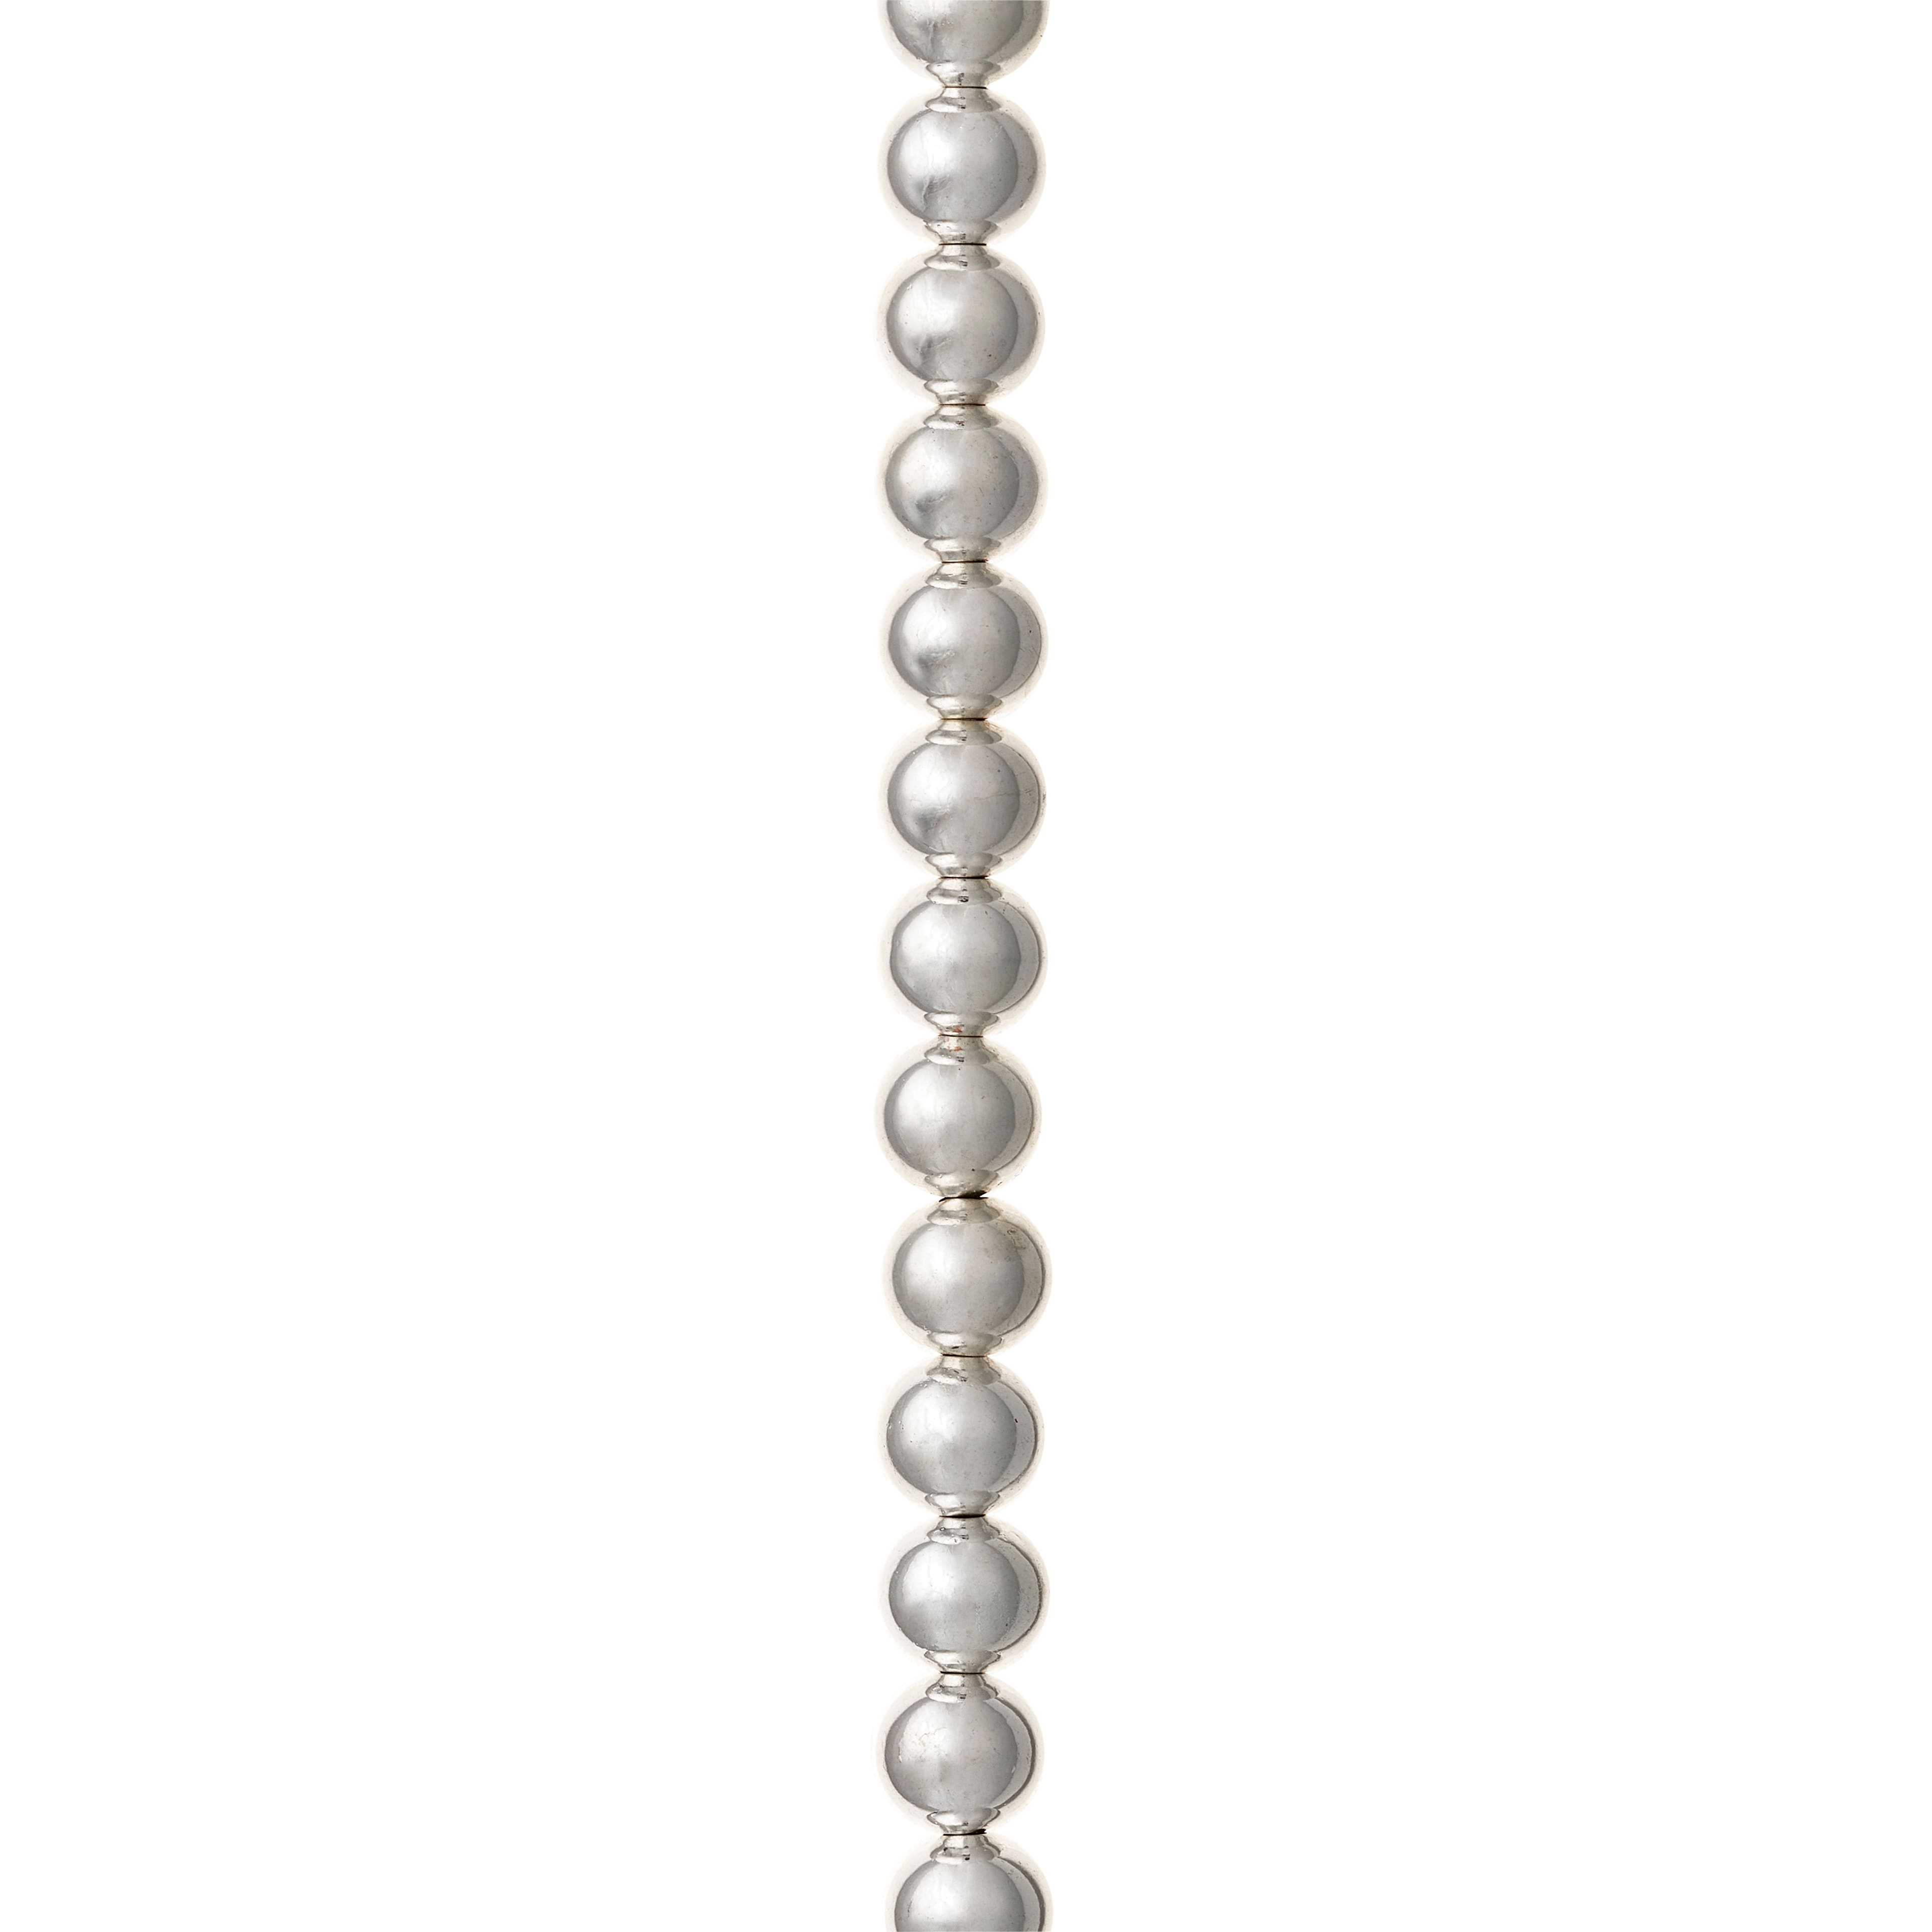 The Beadsmith® Silver Plated Crimp Bead Cover, 80ct., Michaels